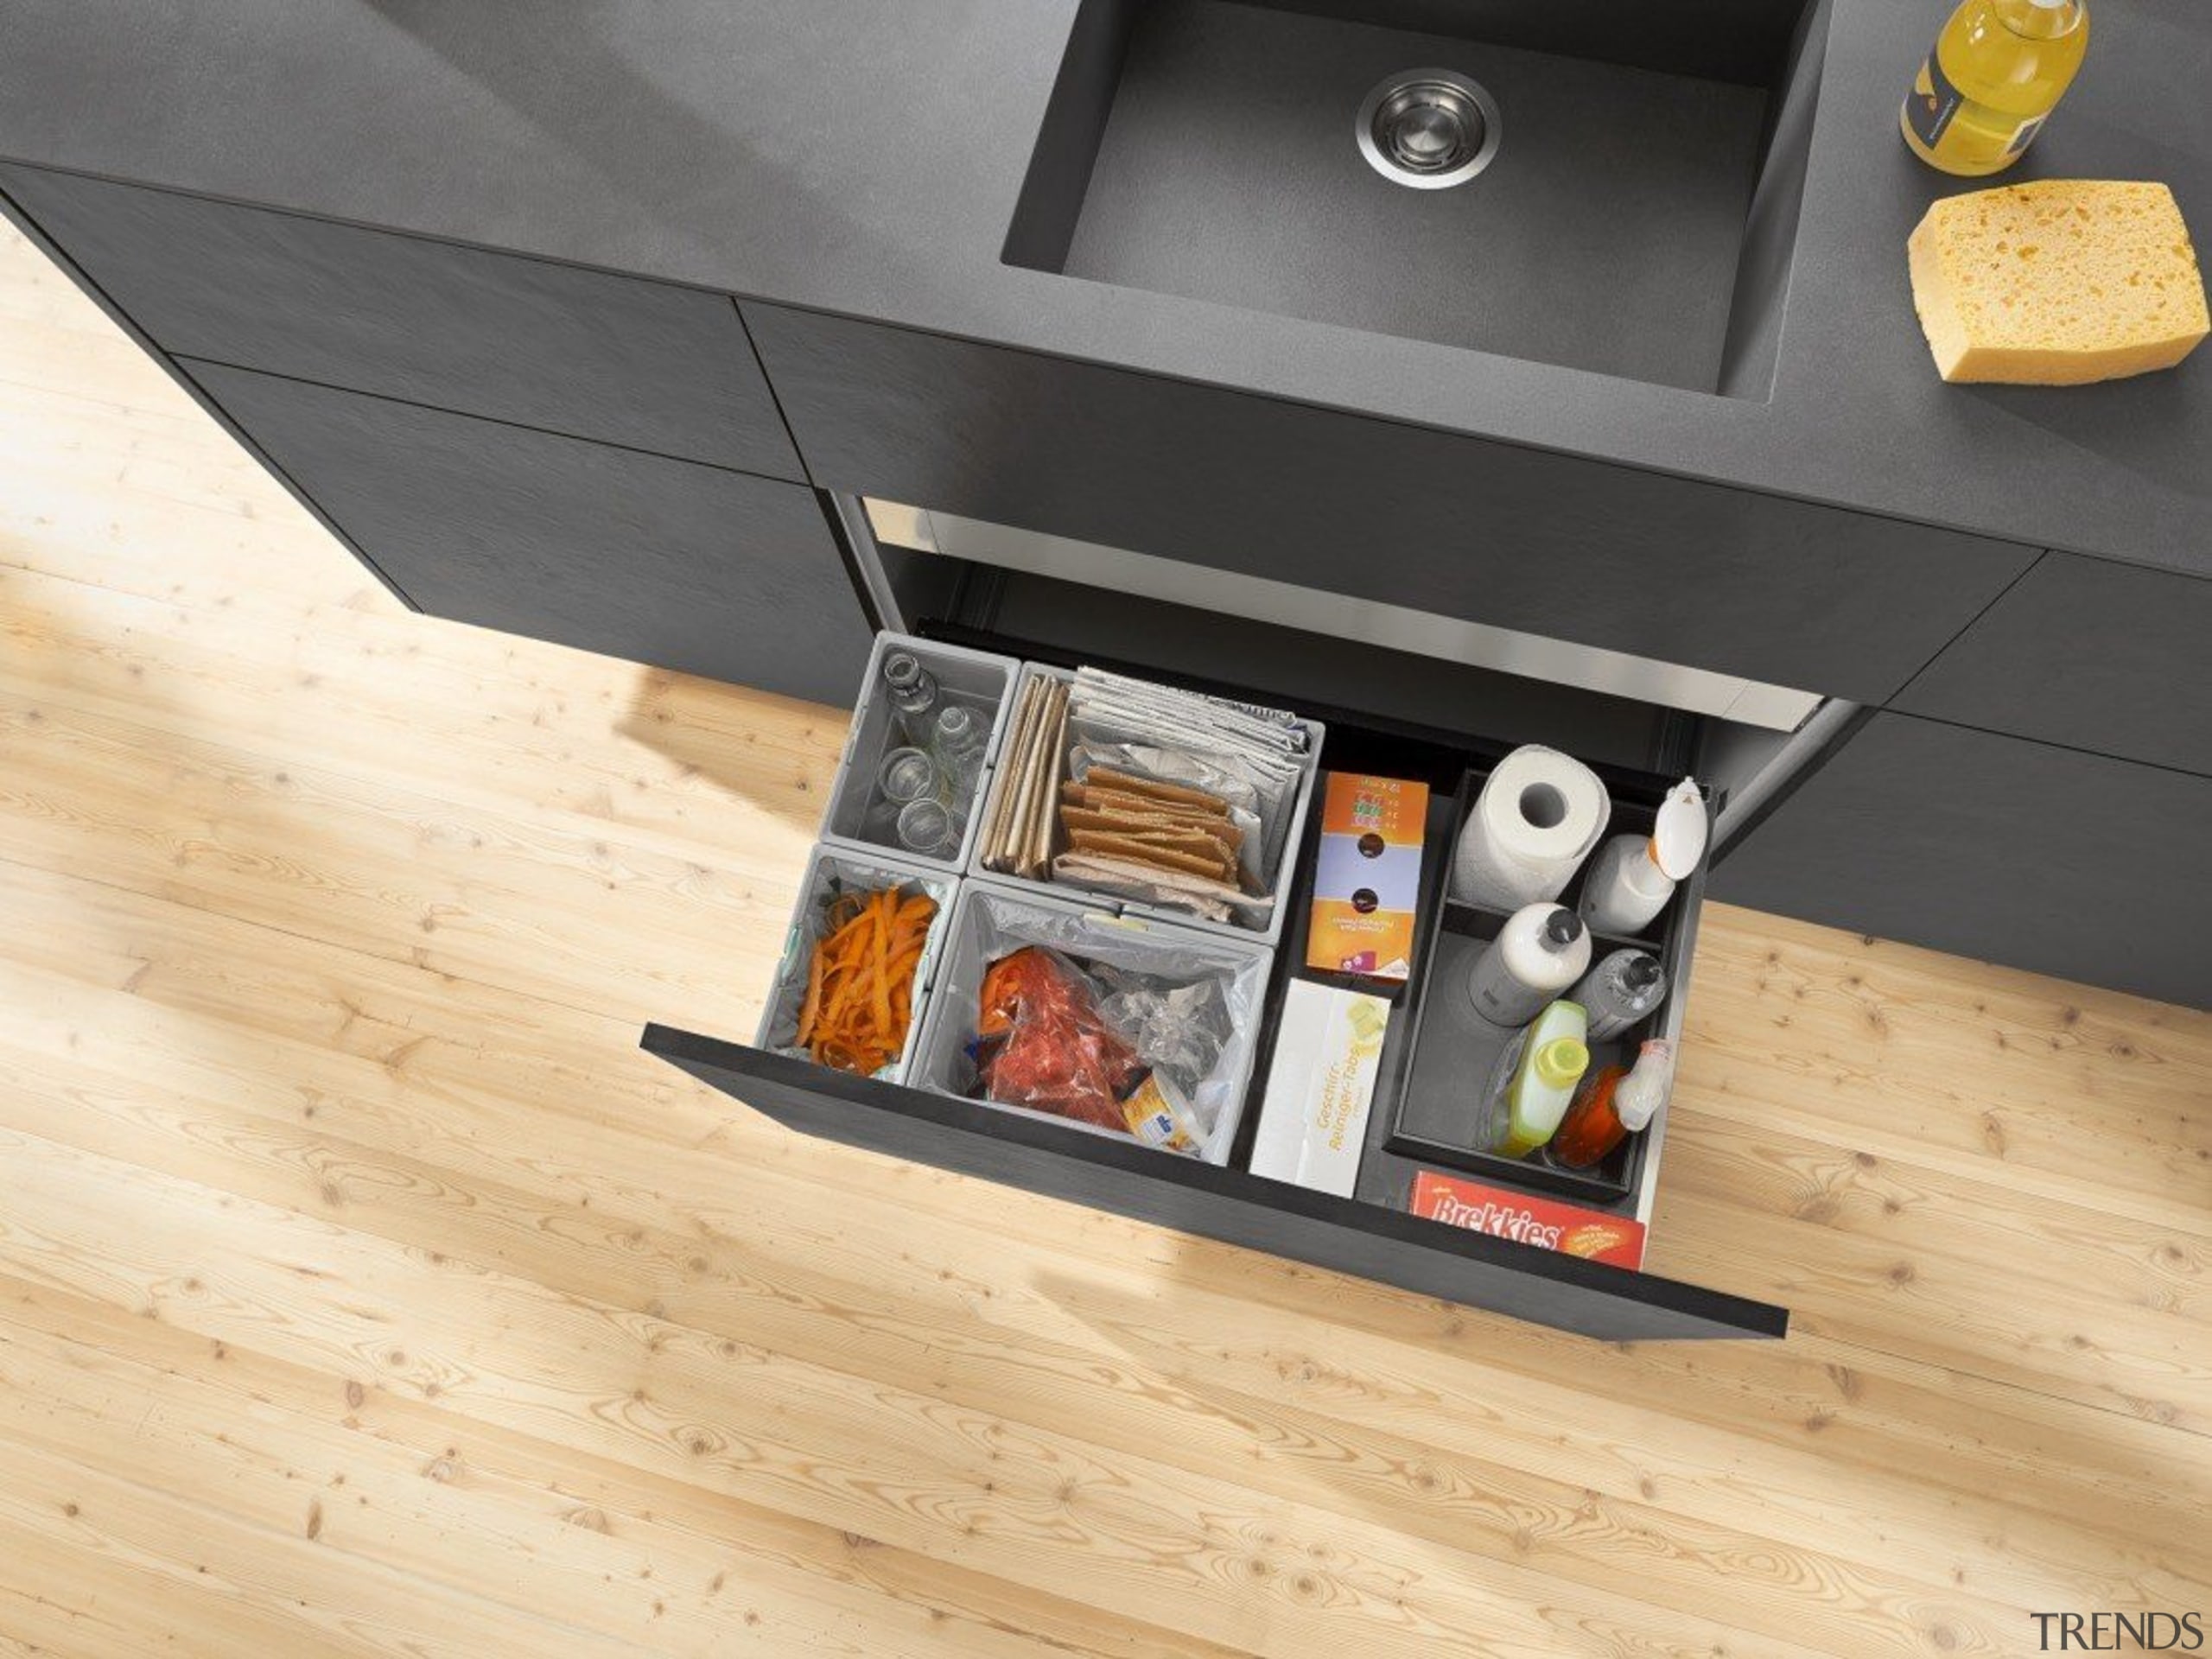 AMBIA-LINE inner dividing system – organization at its floor, flooring, furniture, product design, table, orange, gray